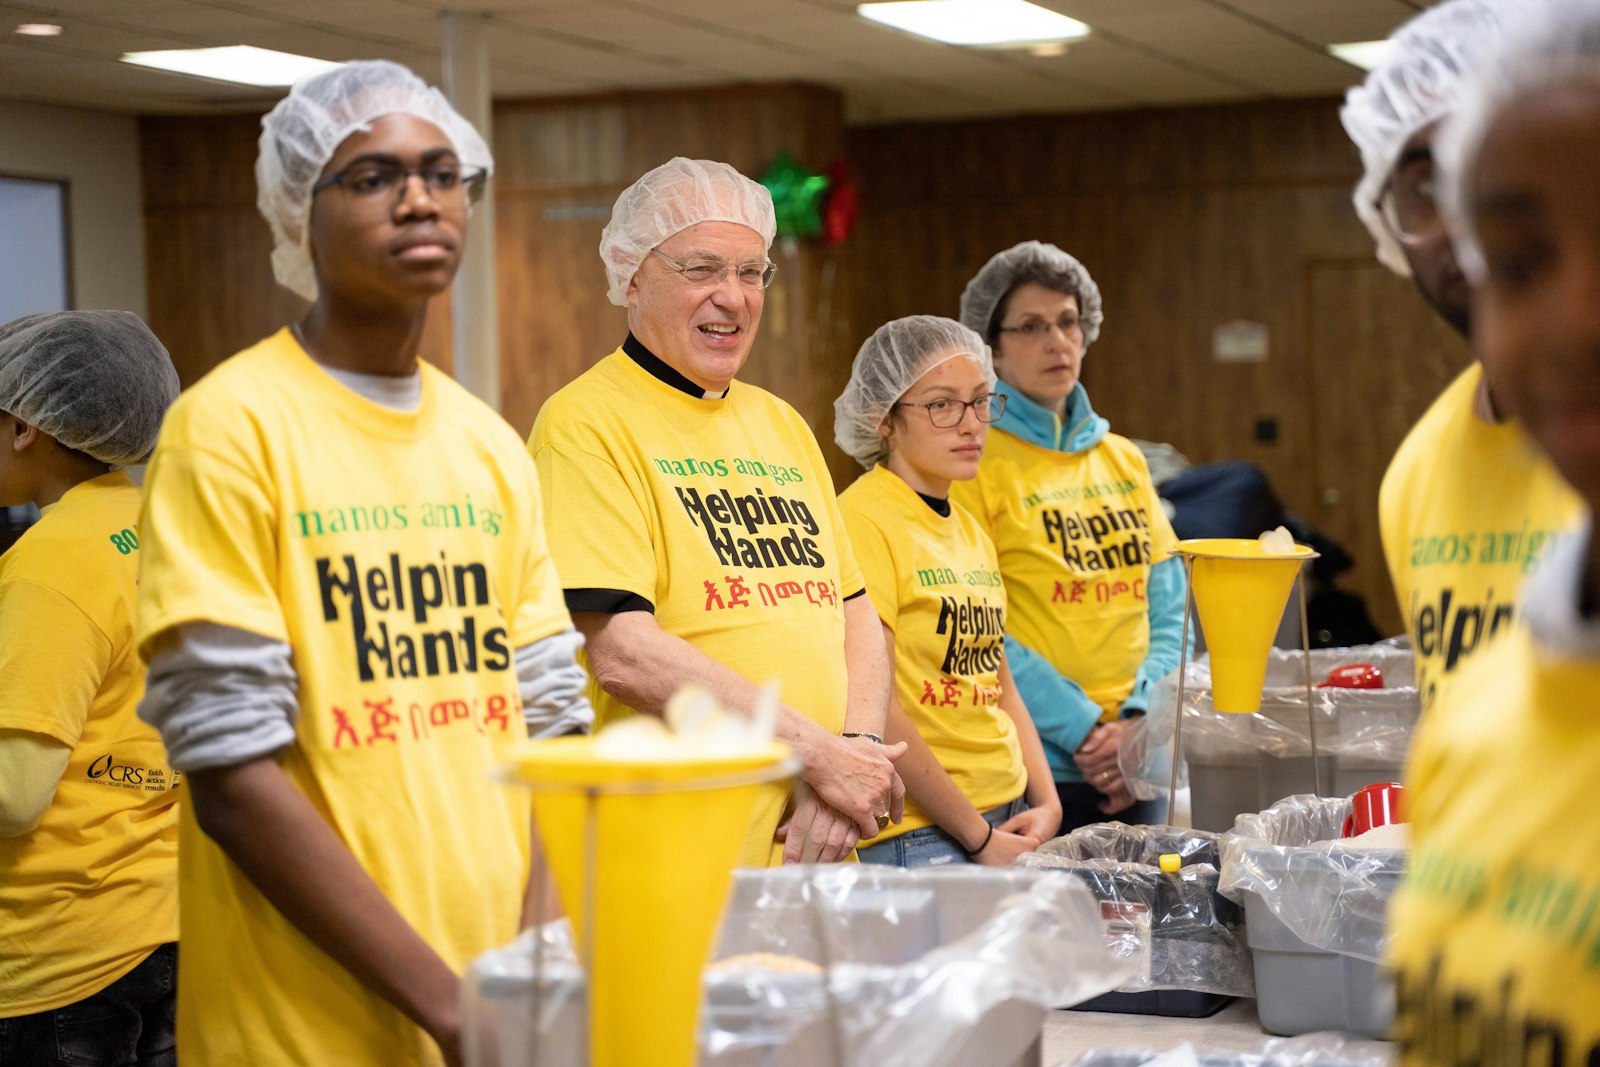 Bishop Hanchon helps students package meals for families in the poor African nation of Burkina Faso on May 4, 2019, at St. Charles Lwanga Parish in Detroit. The event saw more than 80 volunteers packing 10,000 meals to ship overseas, a chance for confirmation students to give back to their global family, the bishop said. (Photos by Valaurian Waller | Detroit Catholic)